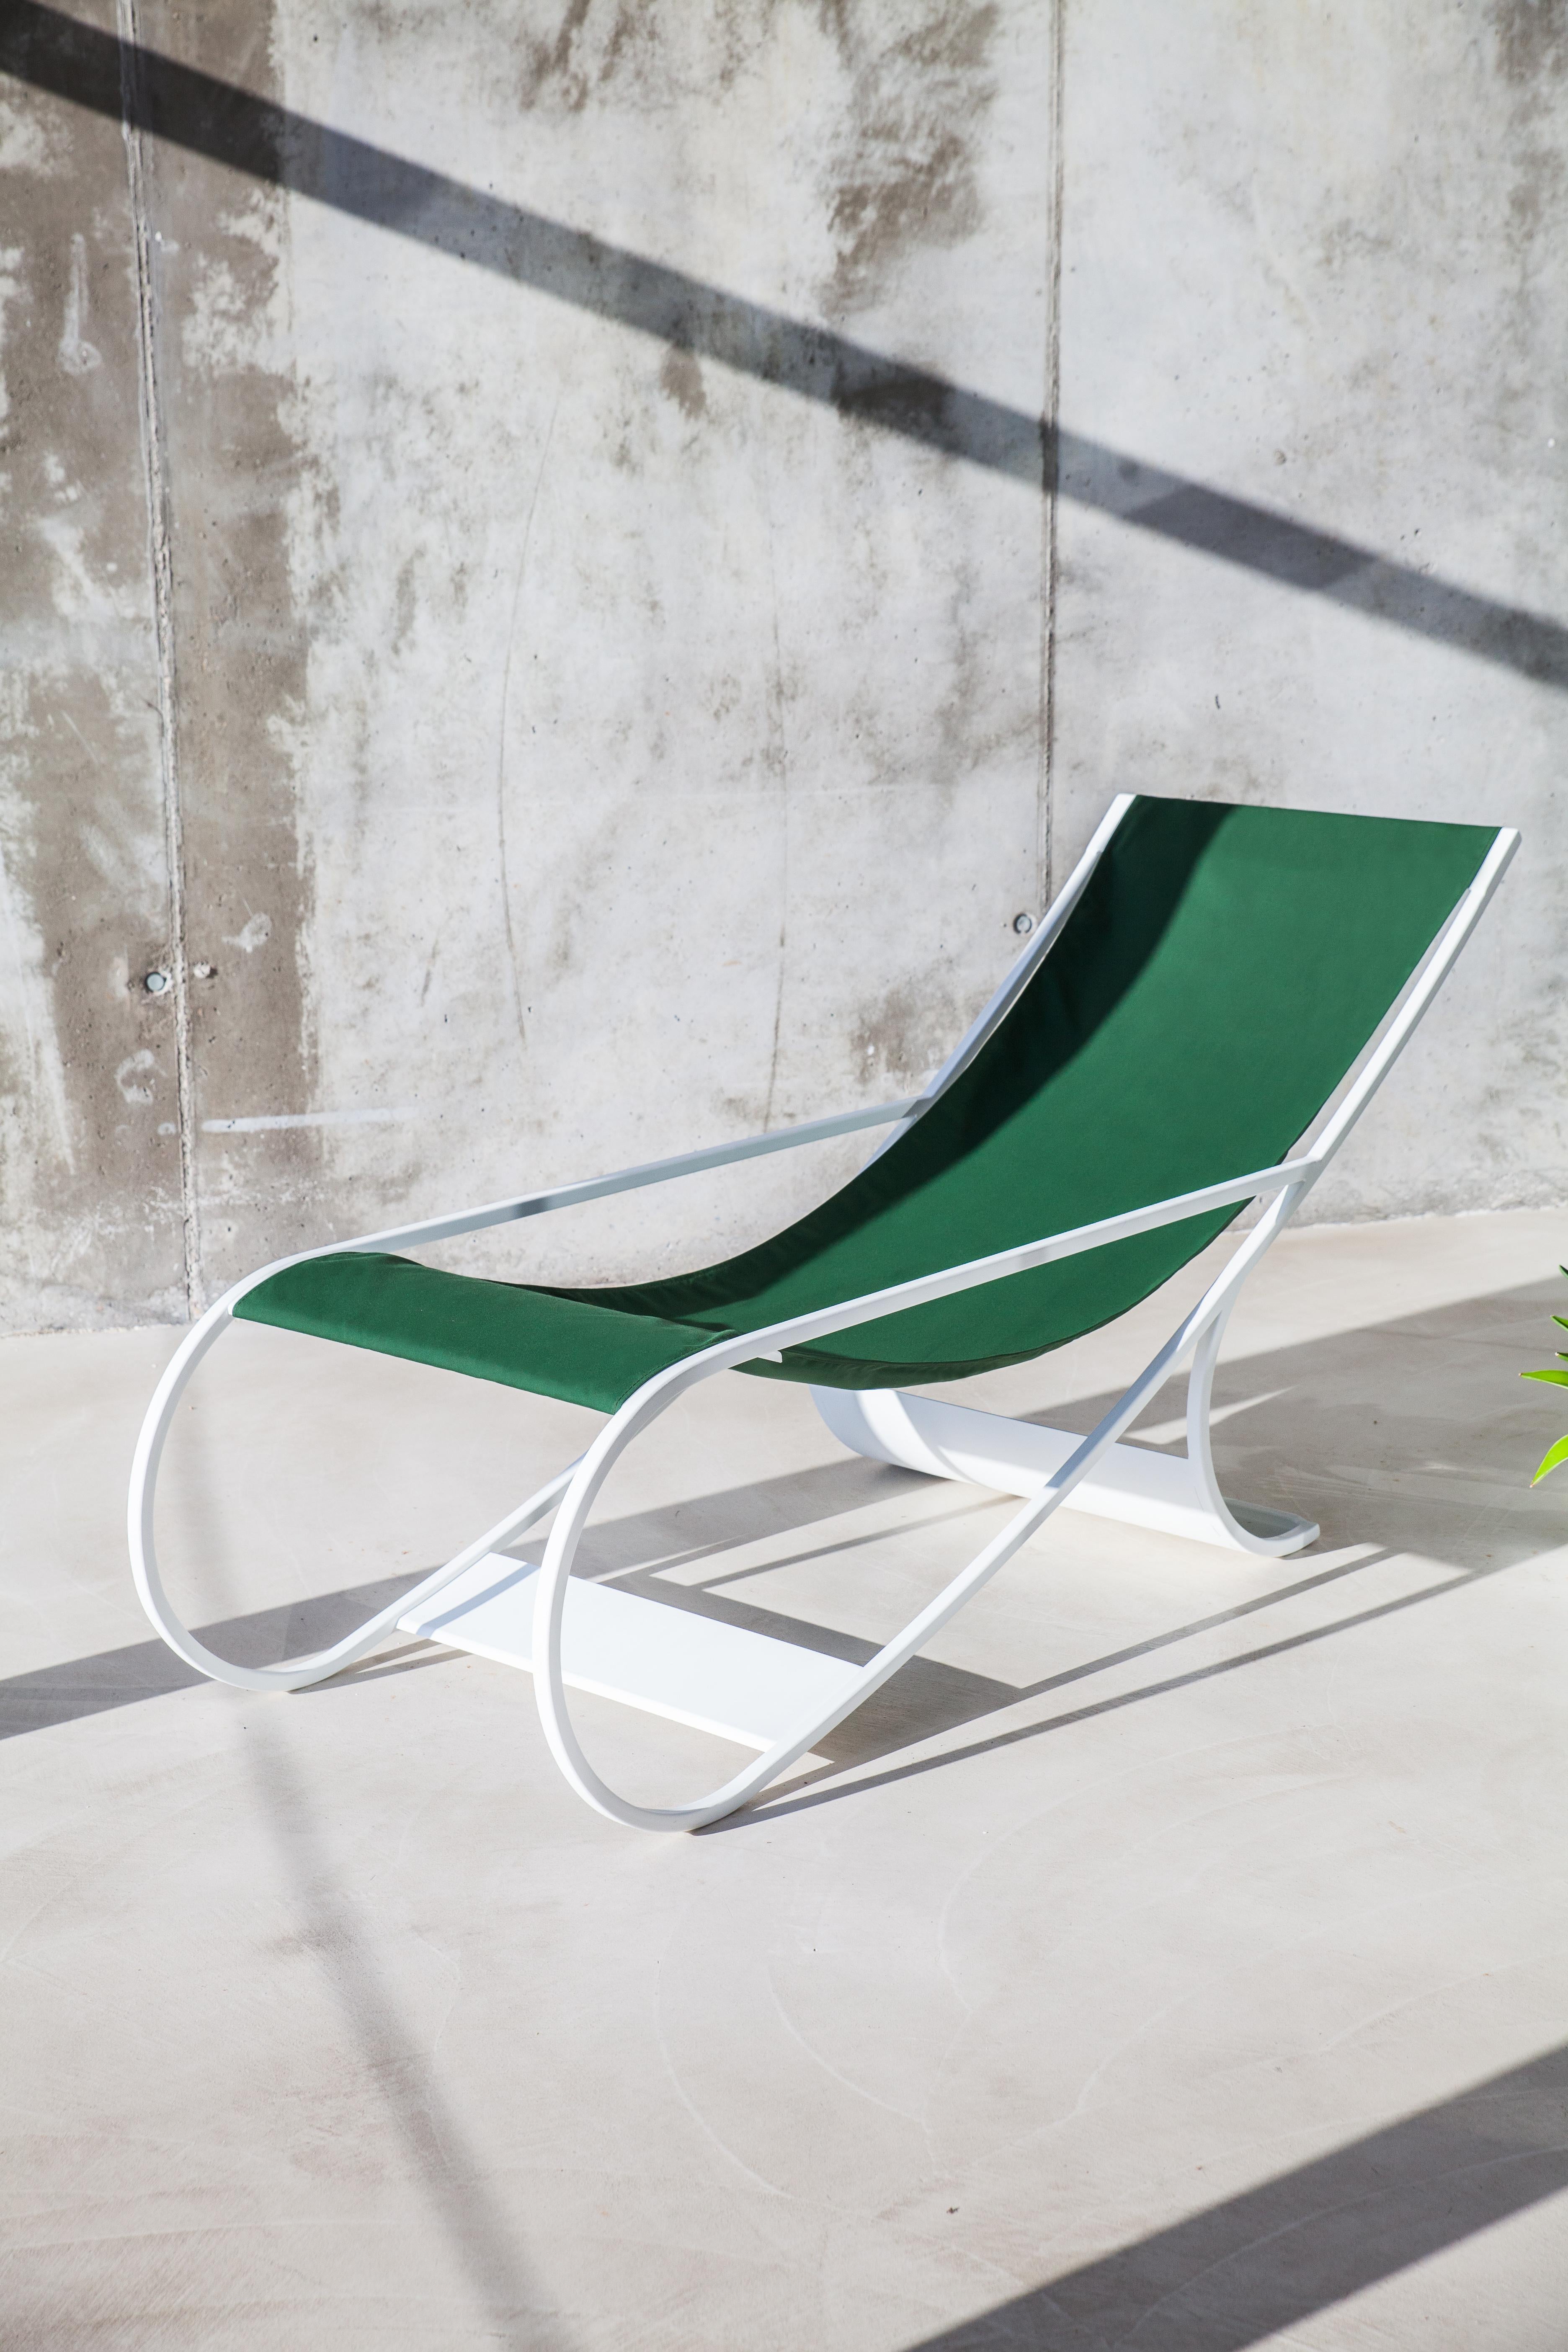 This sun lounger was designed by François Turpin in 1933. Little information is available about Turpin, a Parisian who was also a literary critic, essayist, painter. Only a few of this design were produced at the time – today they can be found in